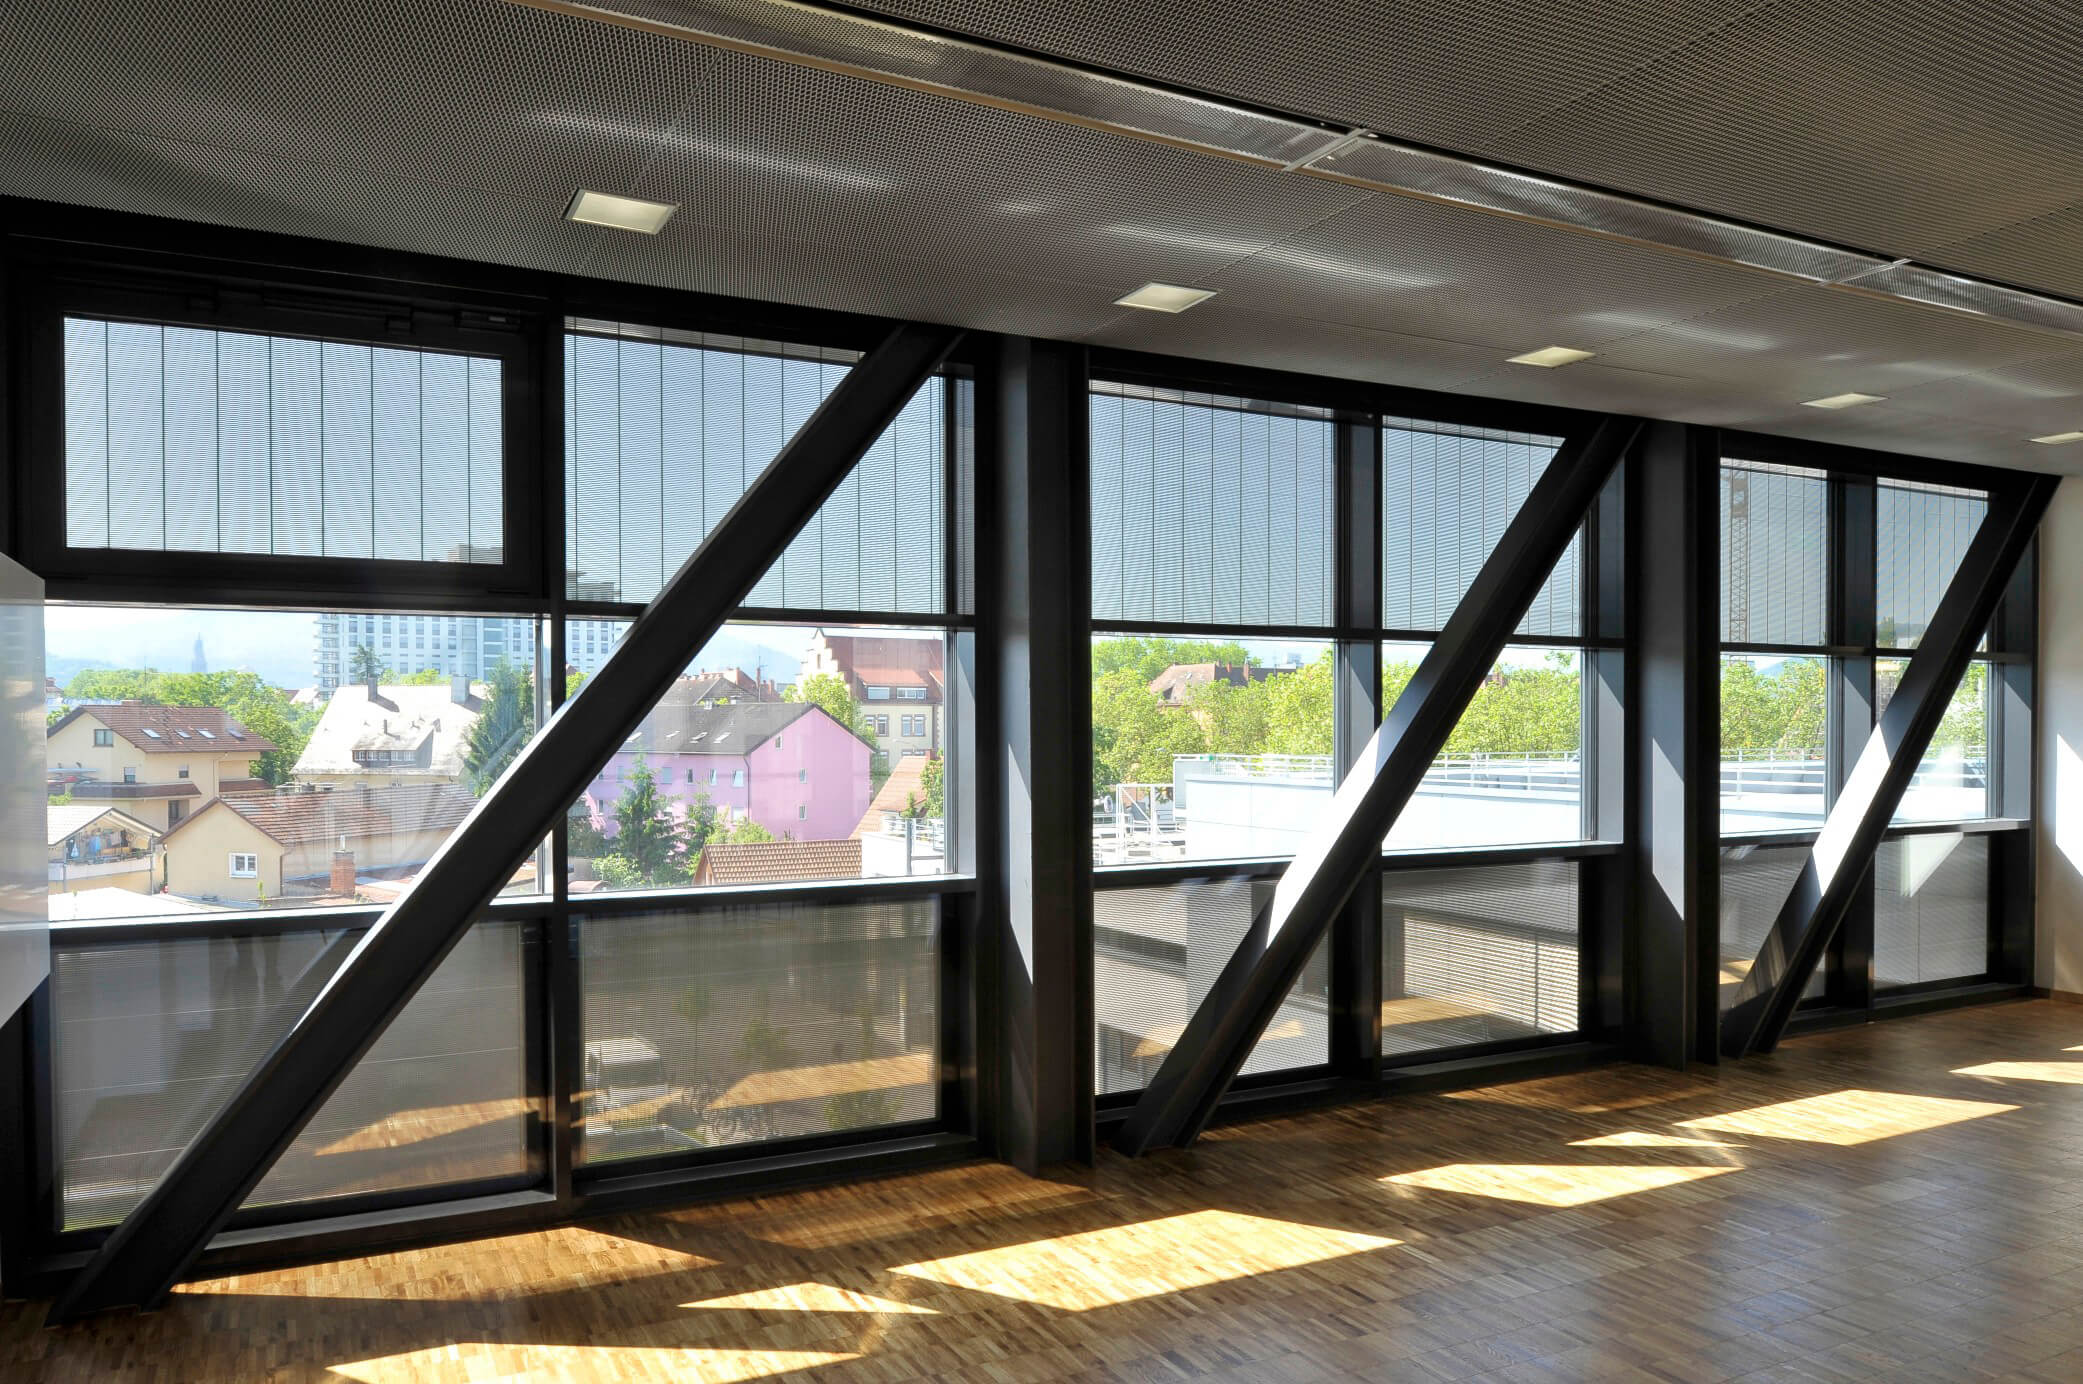 Photo: Seminar room with building-integrated photovoltaics (BIPV) 